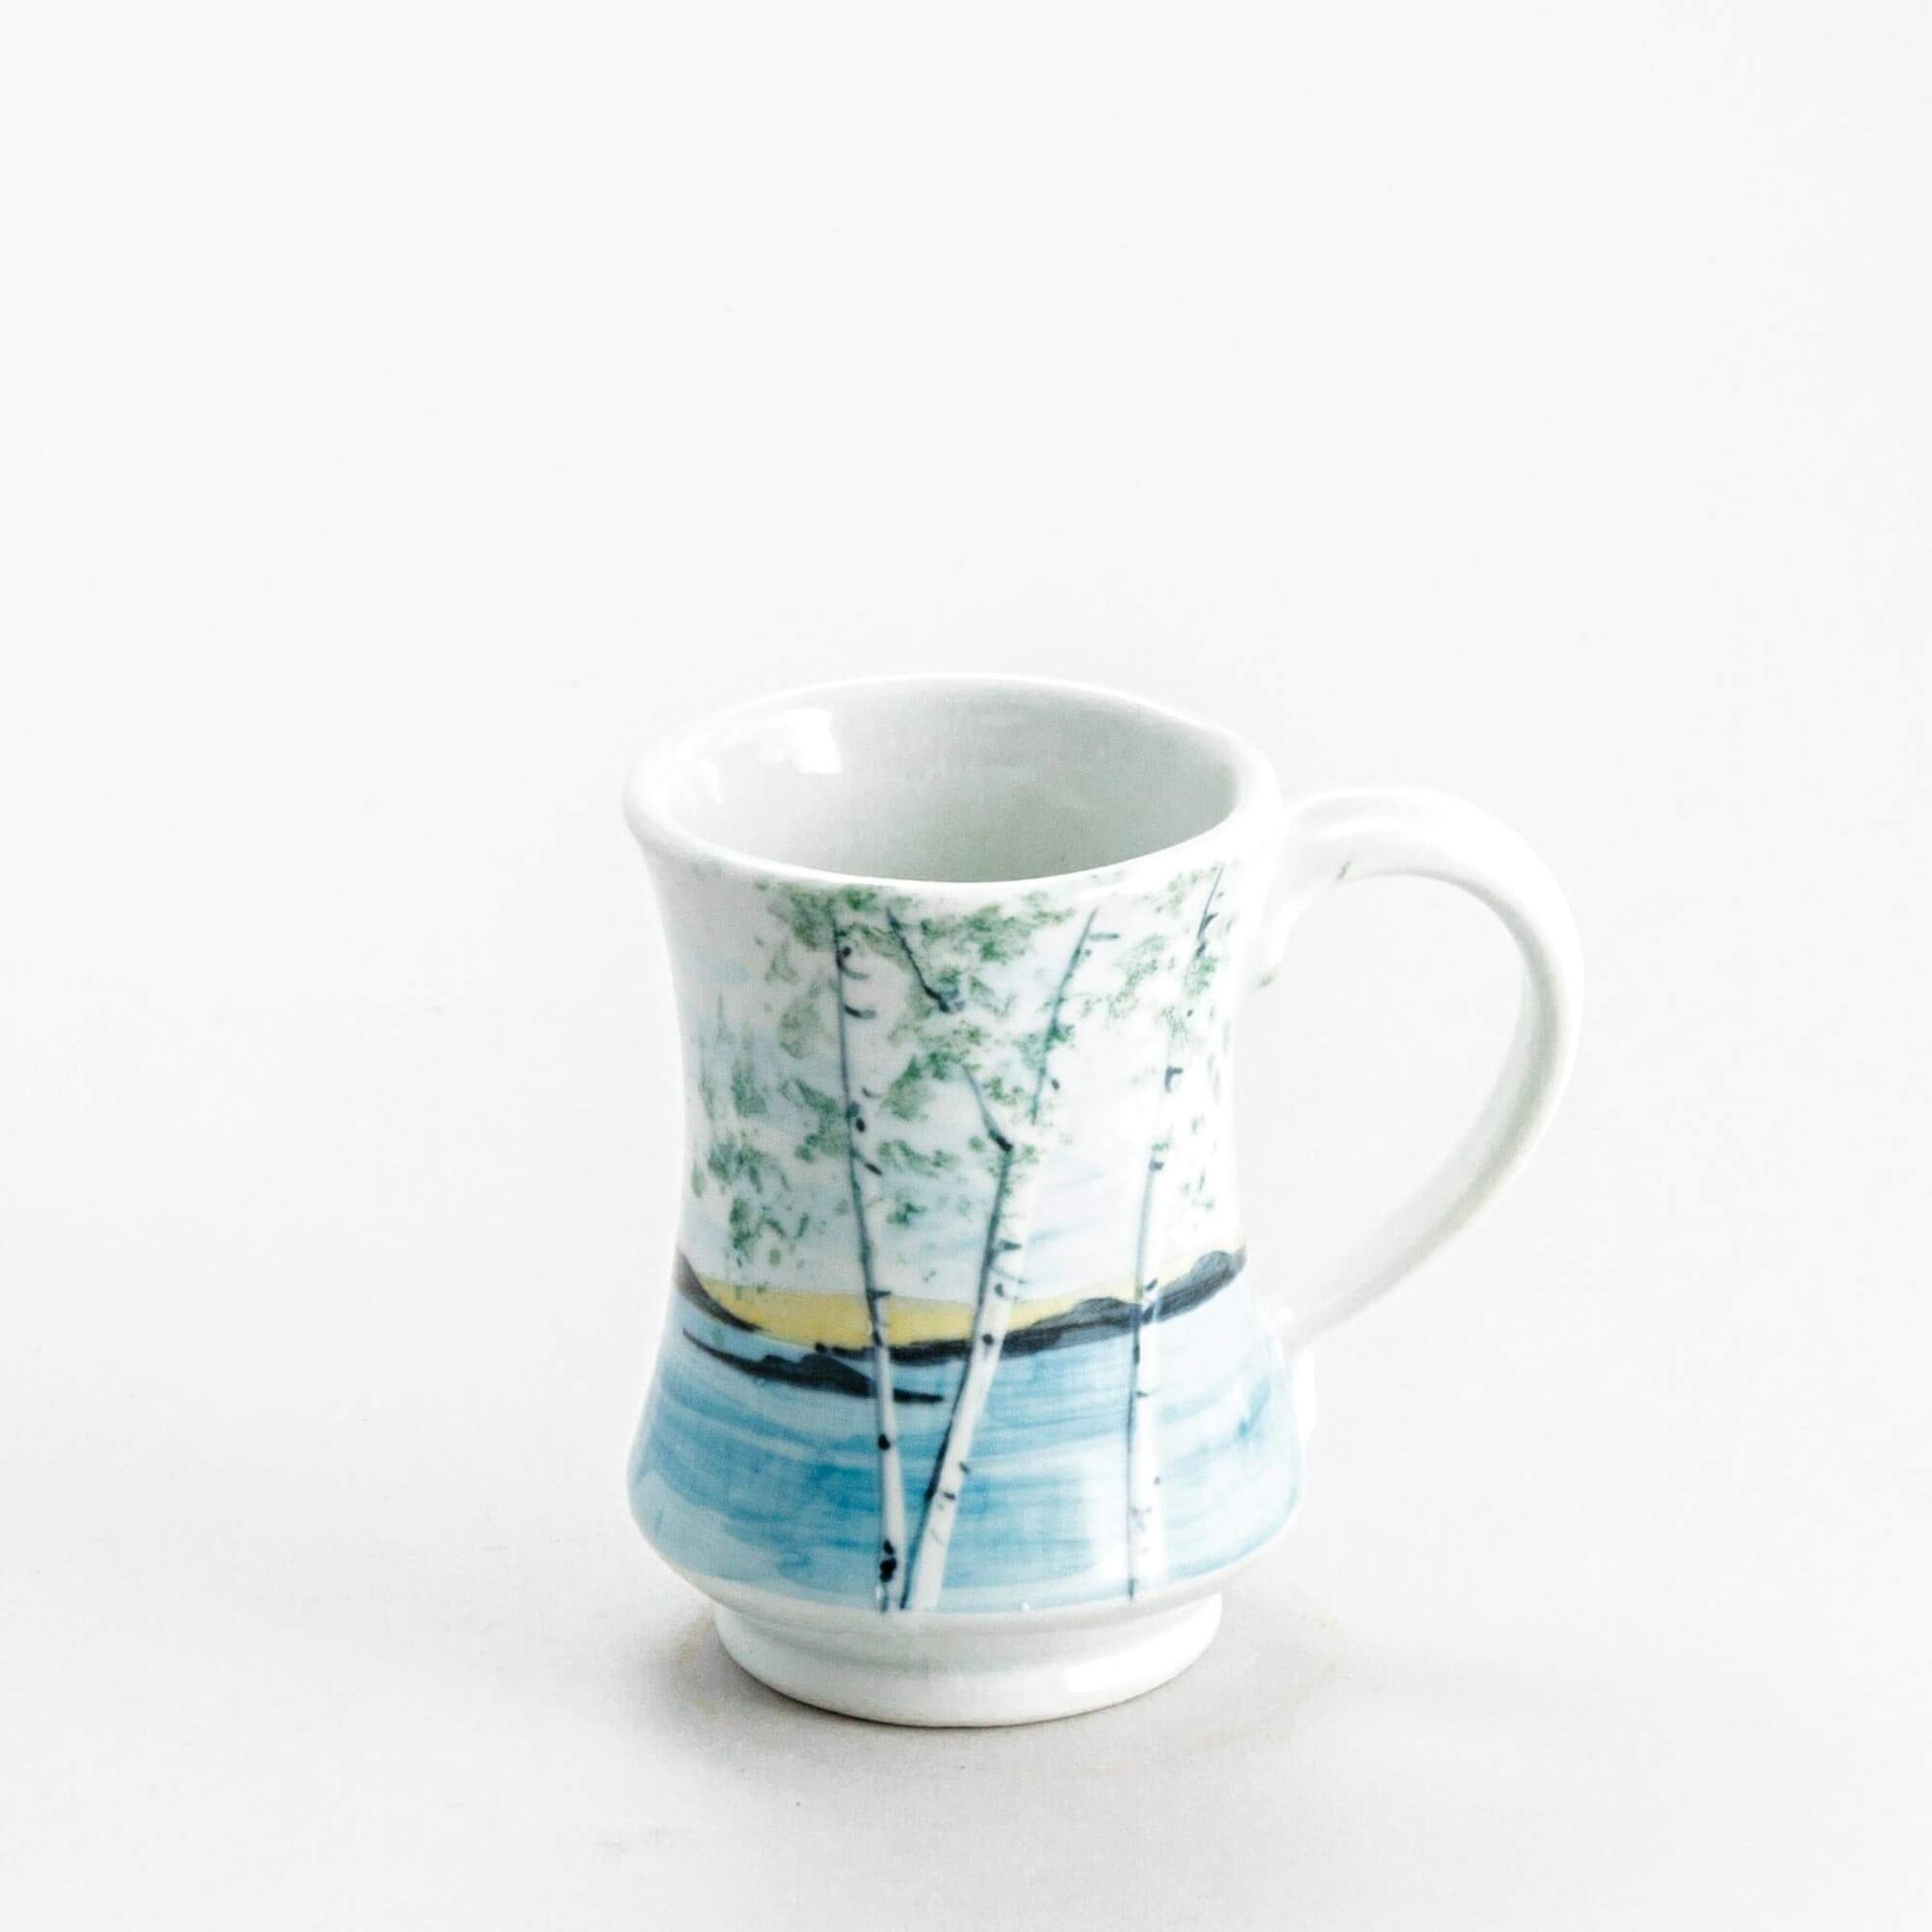 Handmade Pottery Pedestal Mug made by Georgetown Pottery in Maine Birch